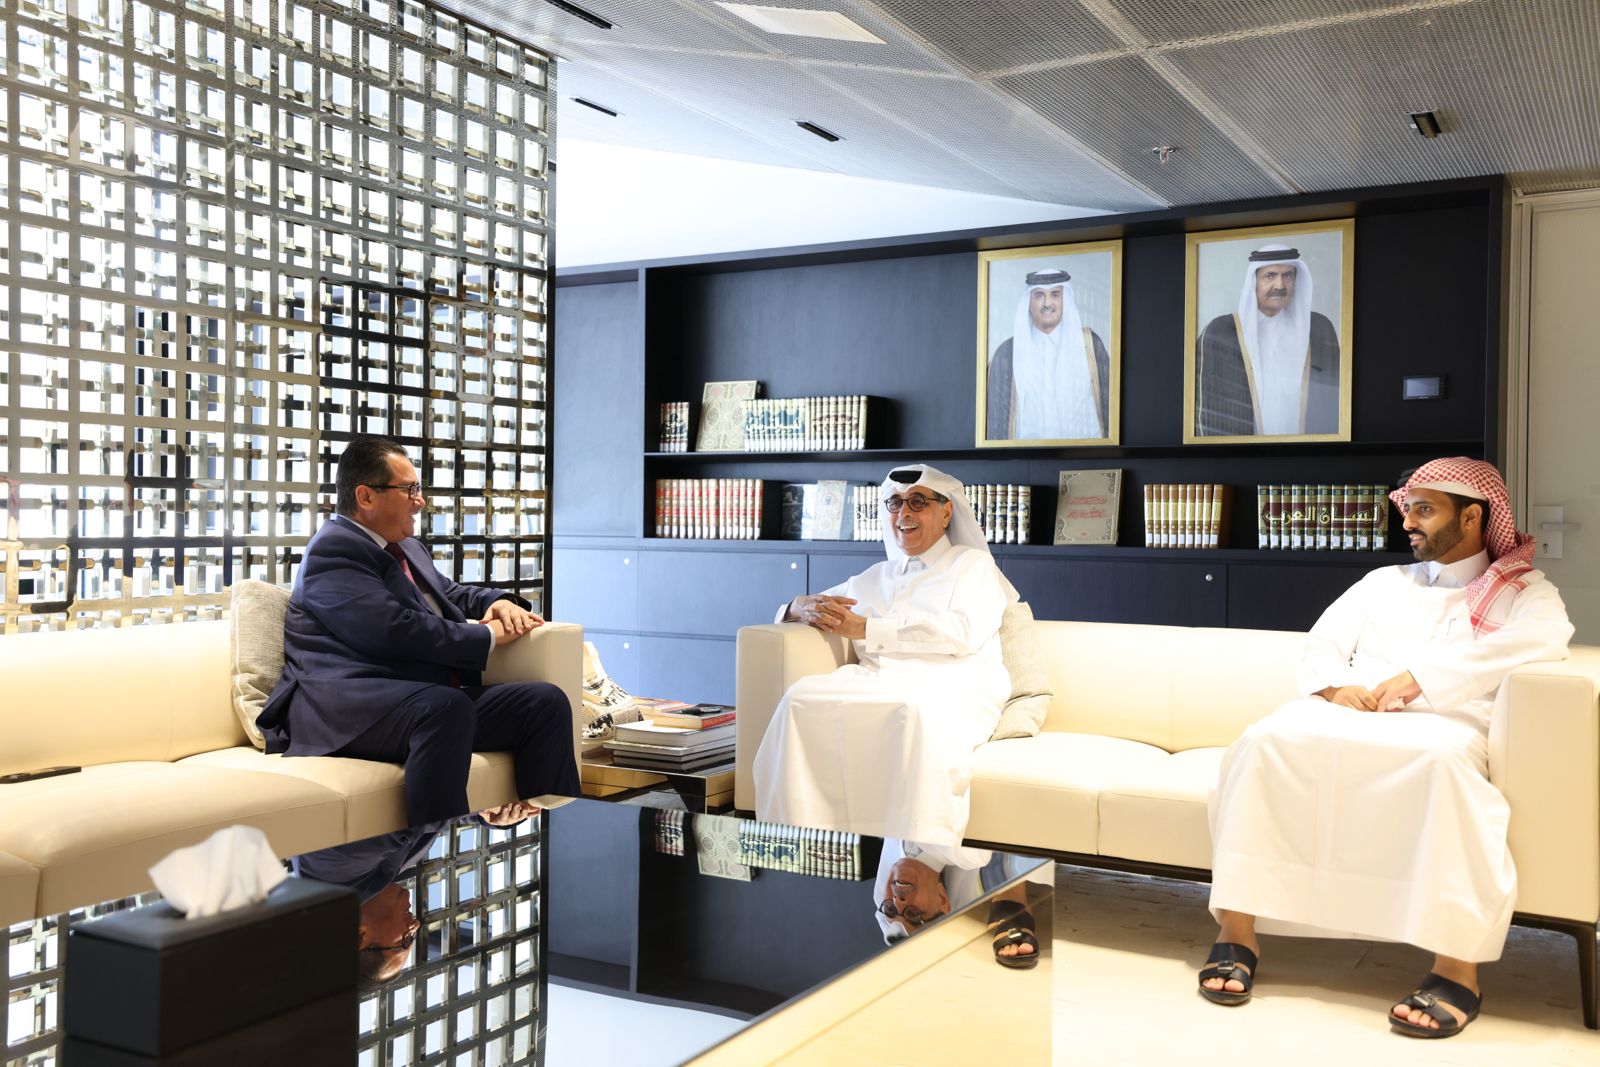 The meeting with H.E. Dr. Hamad bin Abdelaziz Al-Kawari, the State Minister - President of the Qatar National Library